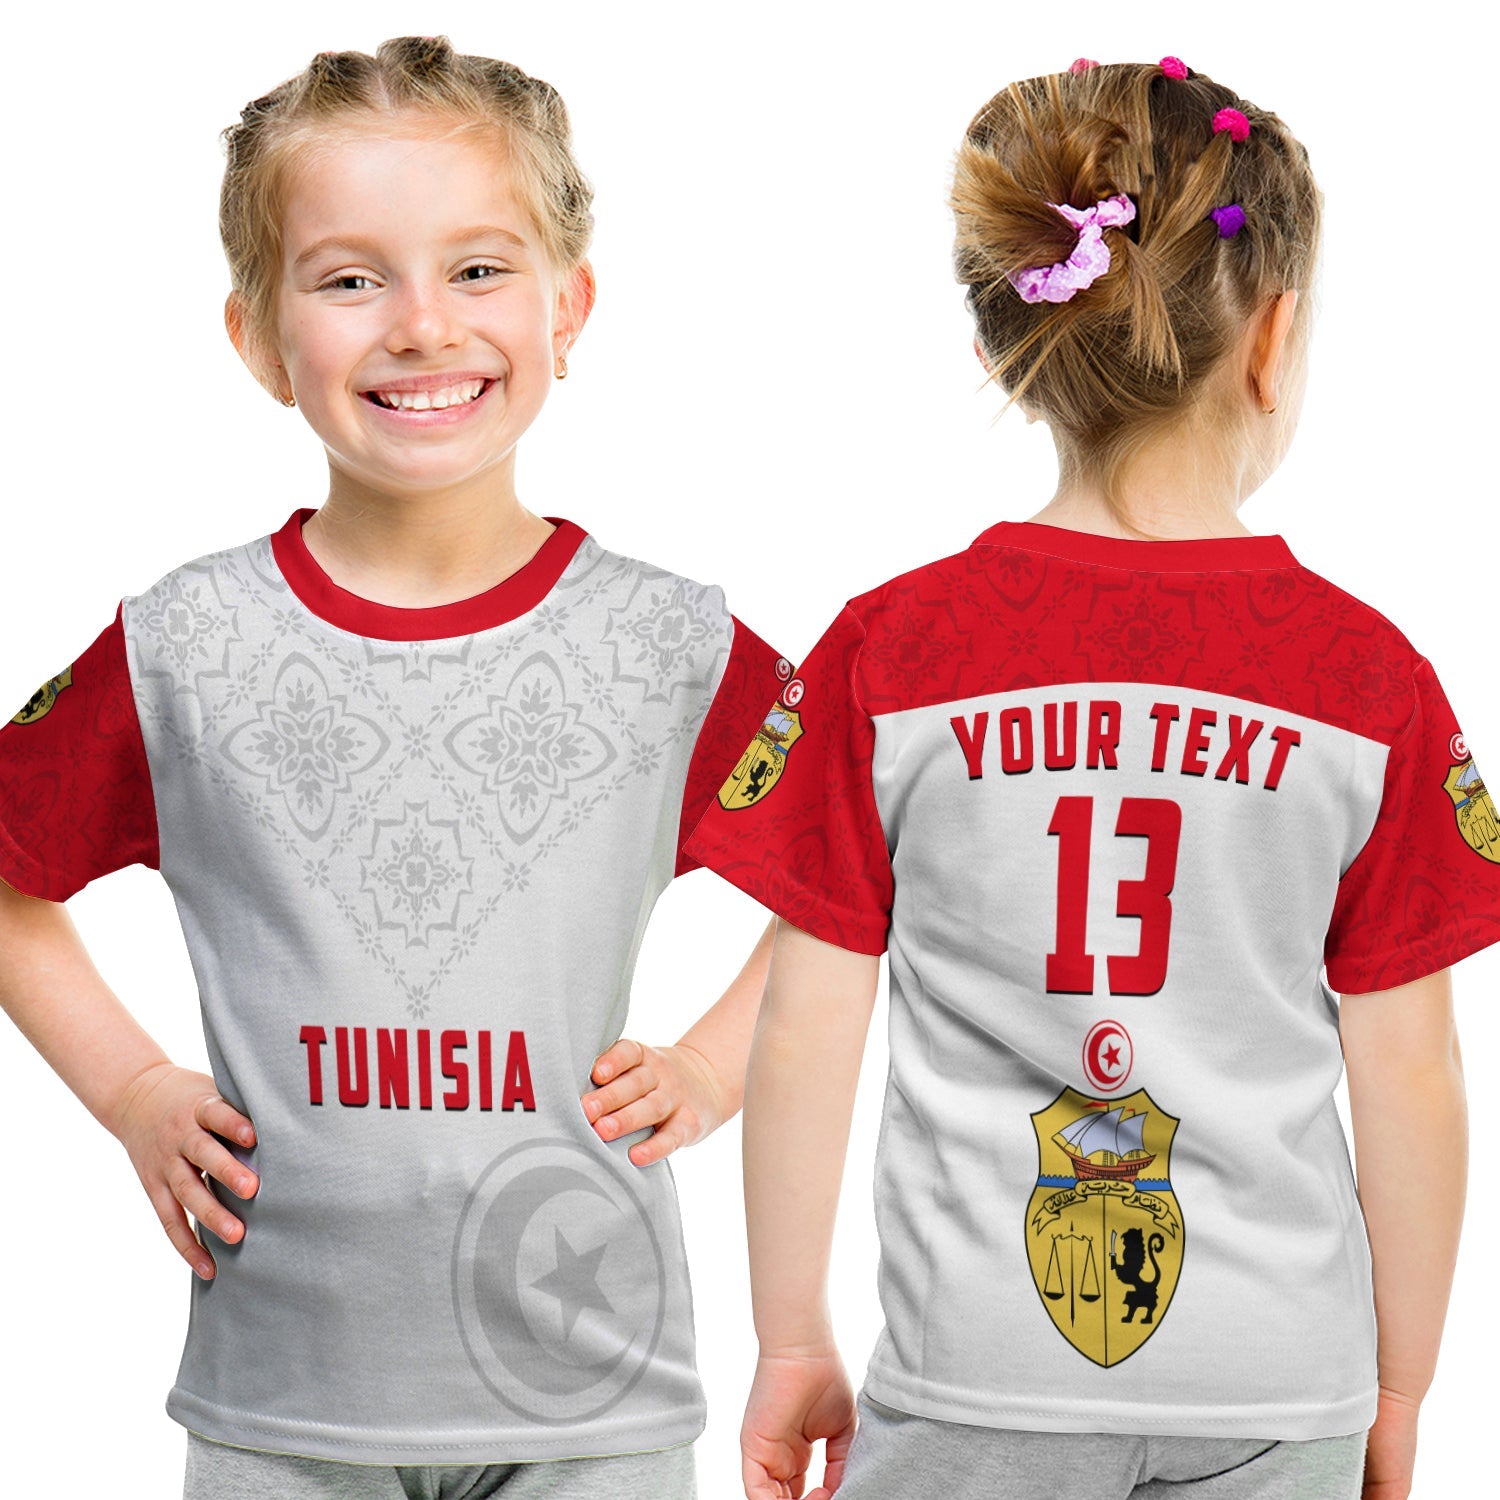 custom-text-and-number-tunisia-t-shirt-kid-tunisian-patterns-sporty-style